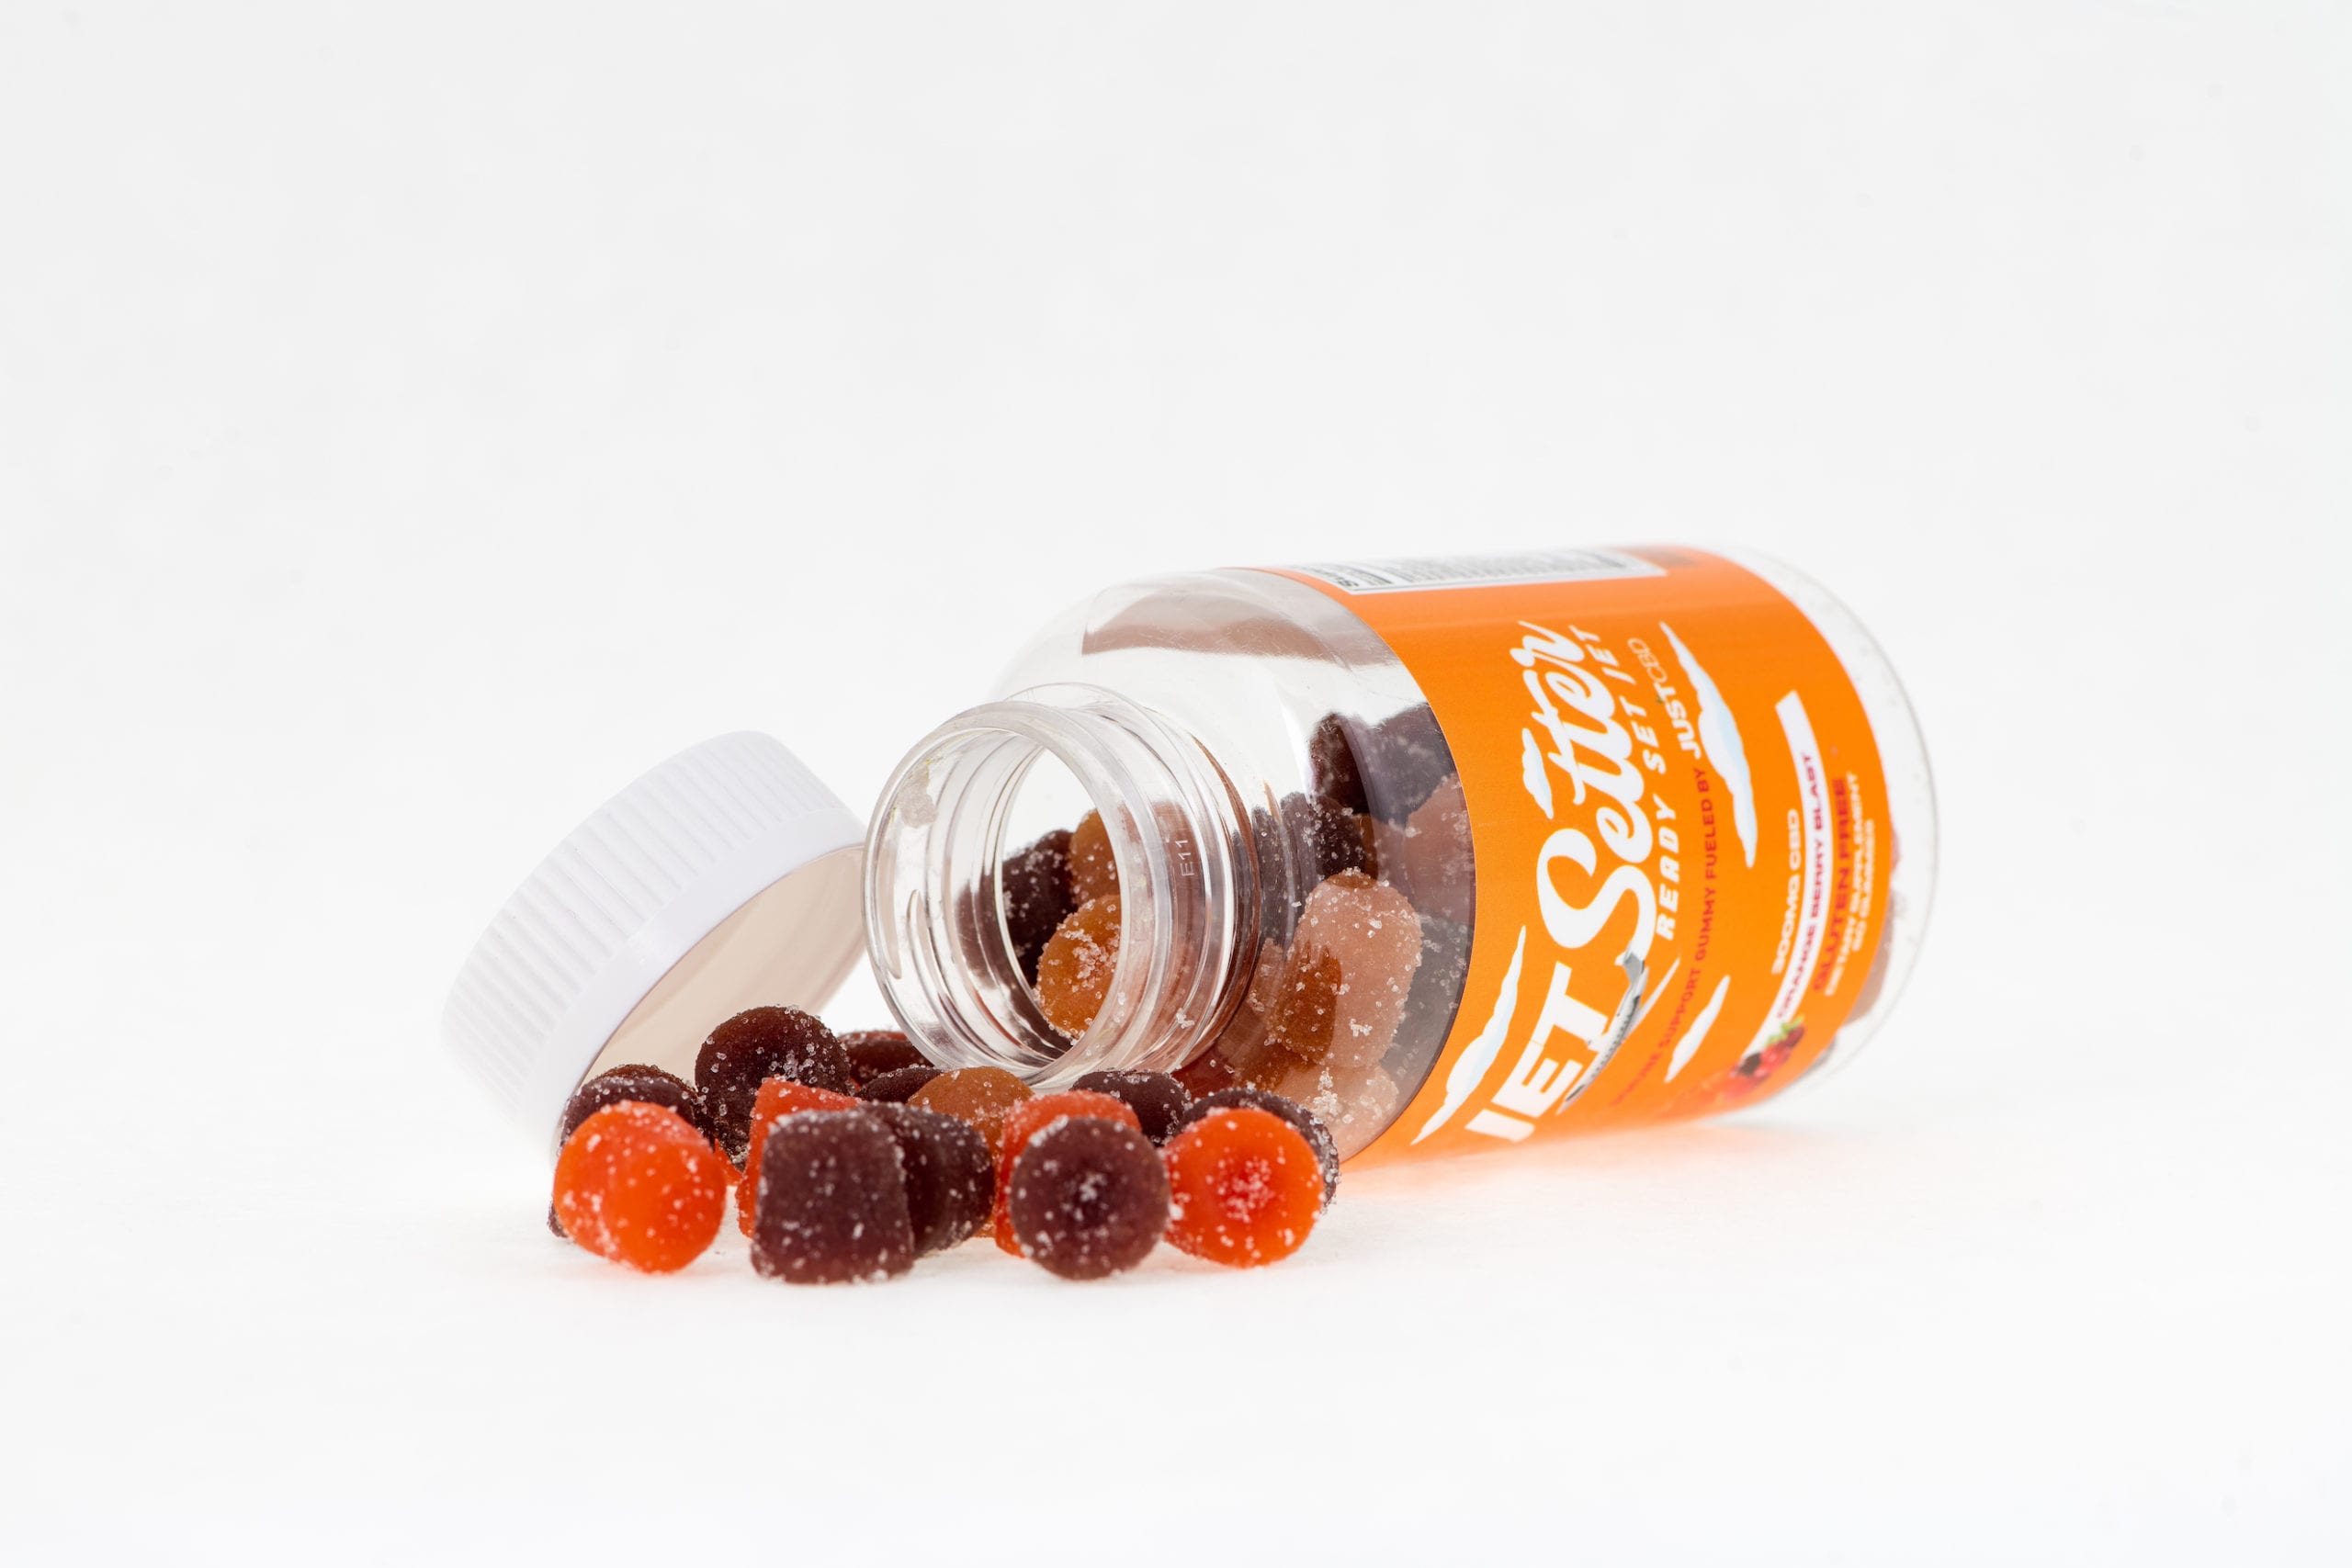 JustCBD Product Photography and JustCBD Products Closeup of Jet Setter immune support gummies on display